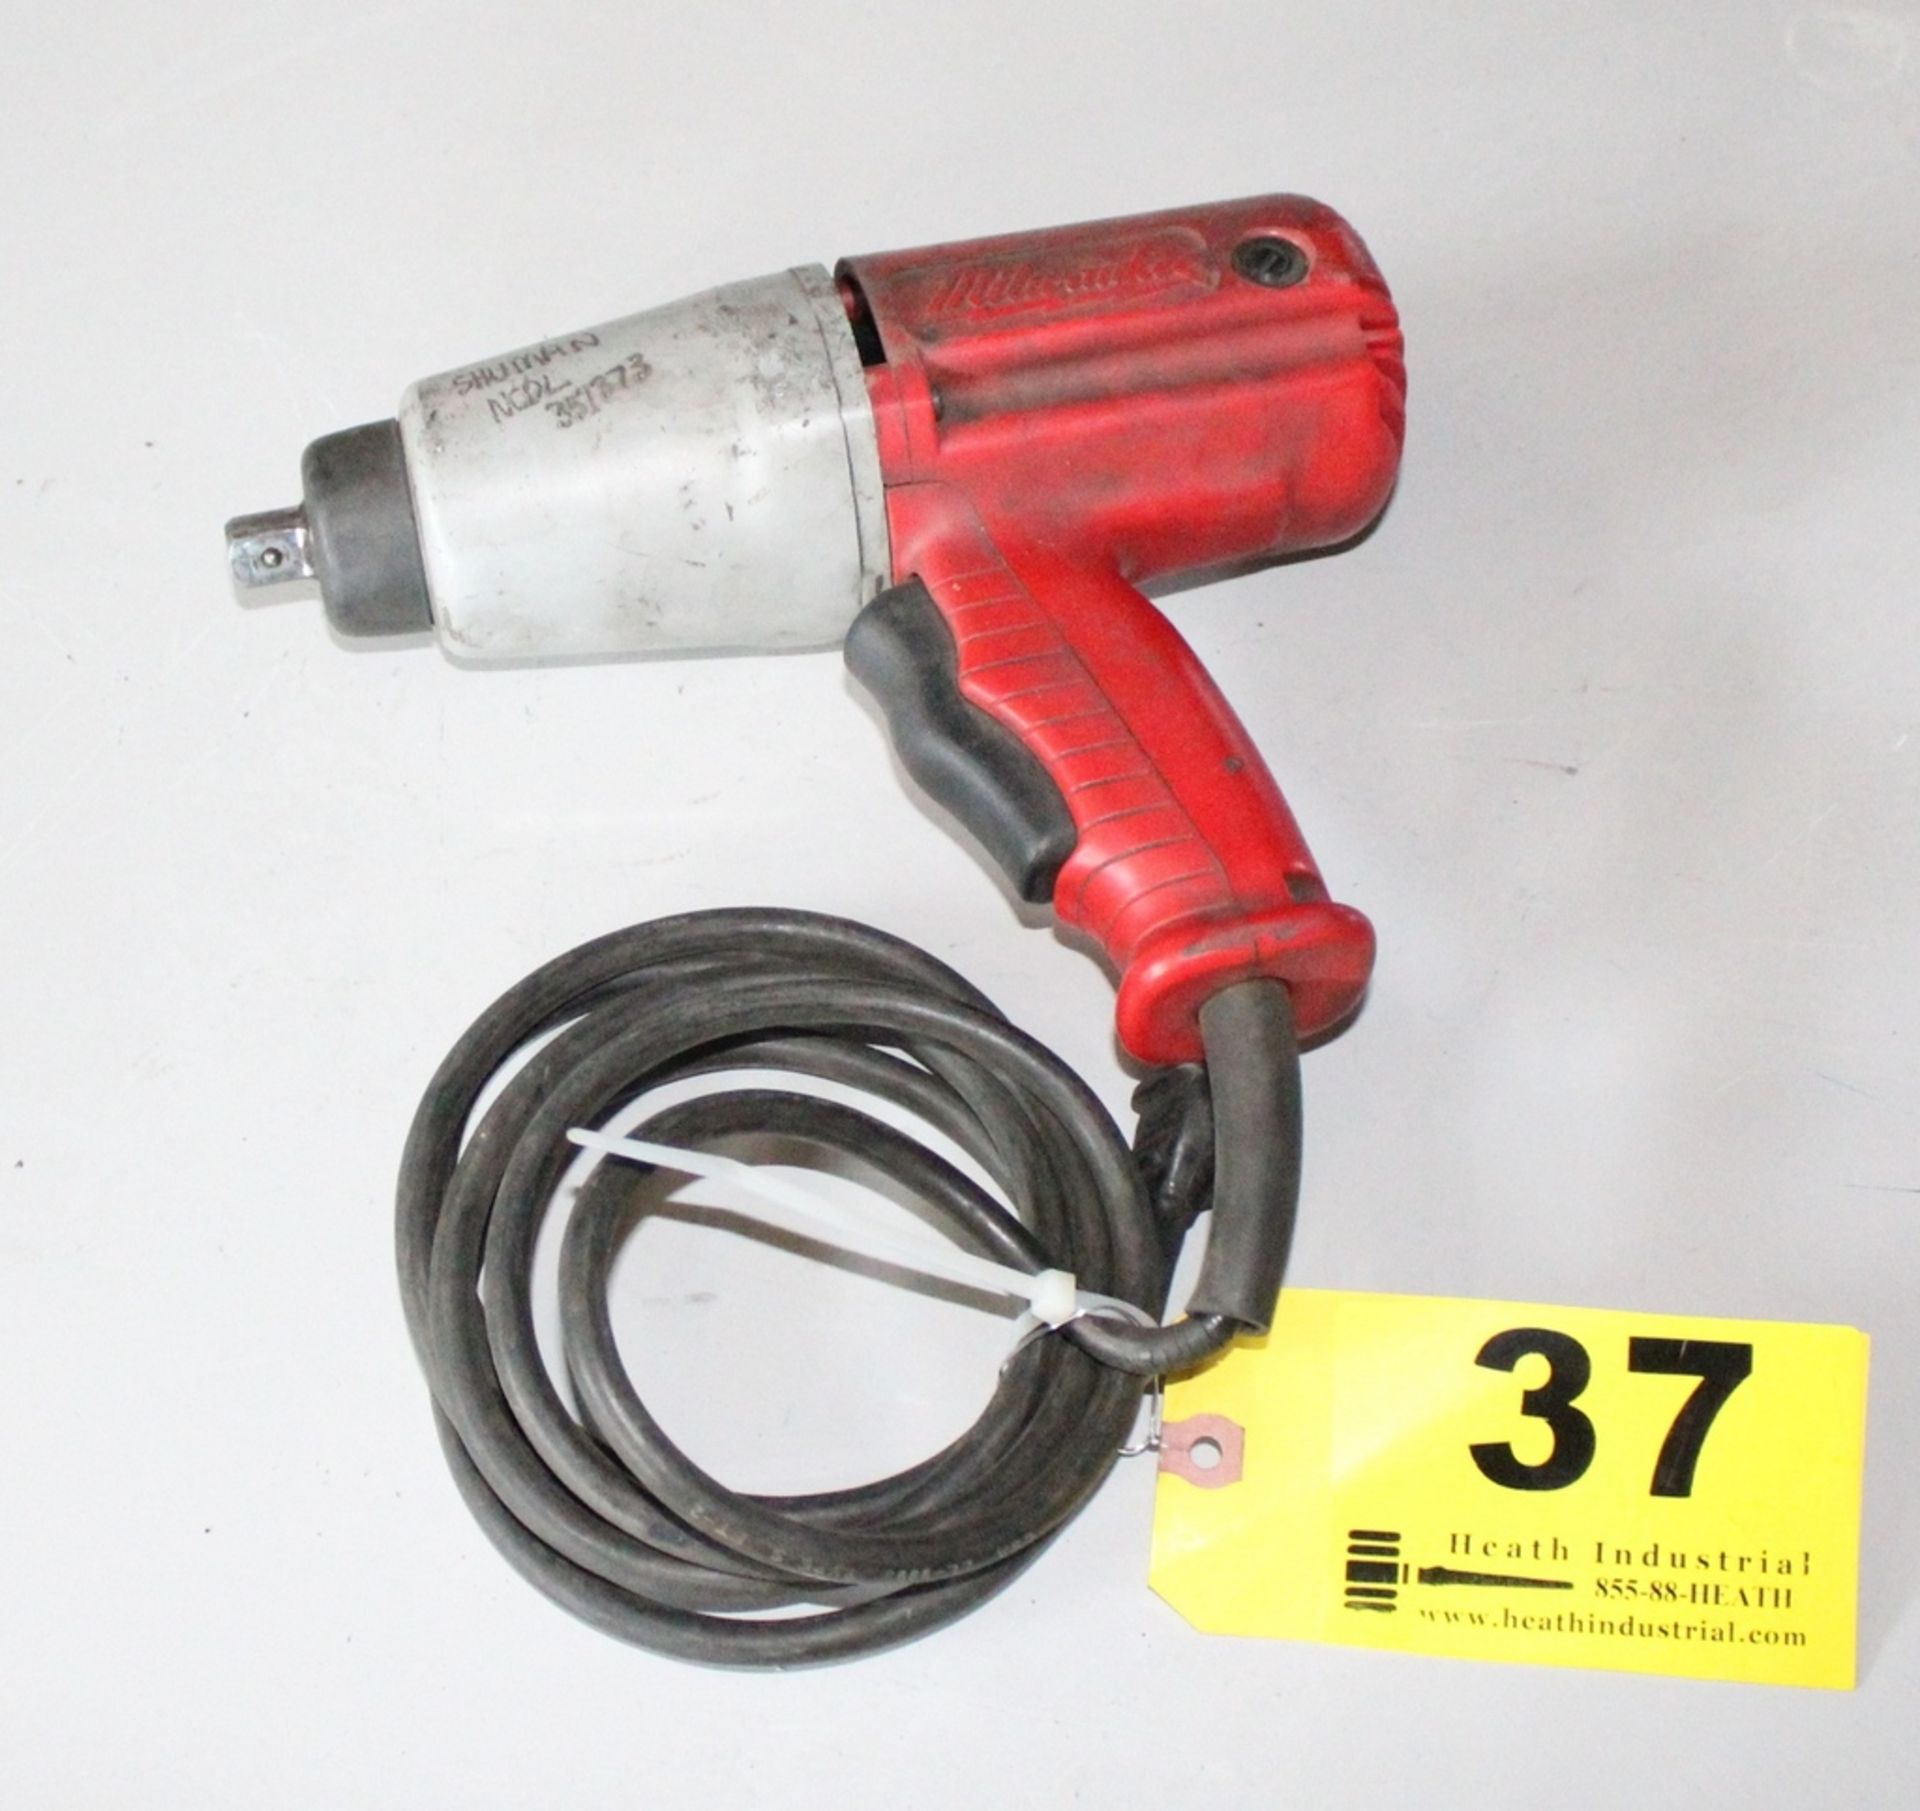 MILWAUKEE 9066 1/2" ELECTRIC IMPACT WRENCH